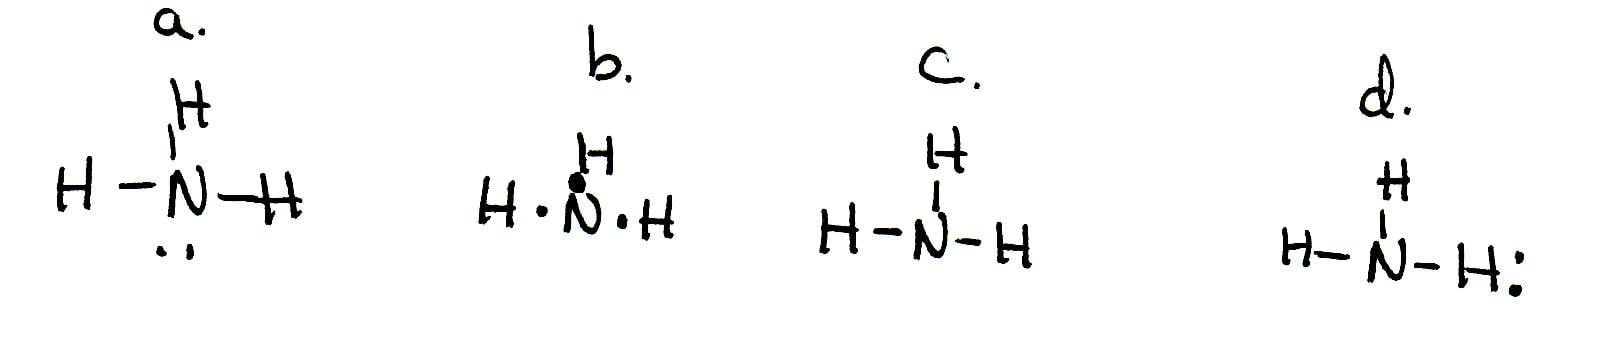 What is the Lewis structure for C2Cl4?